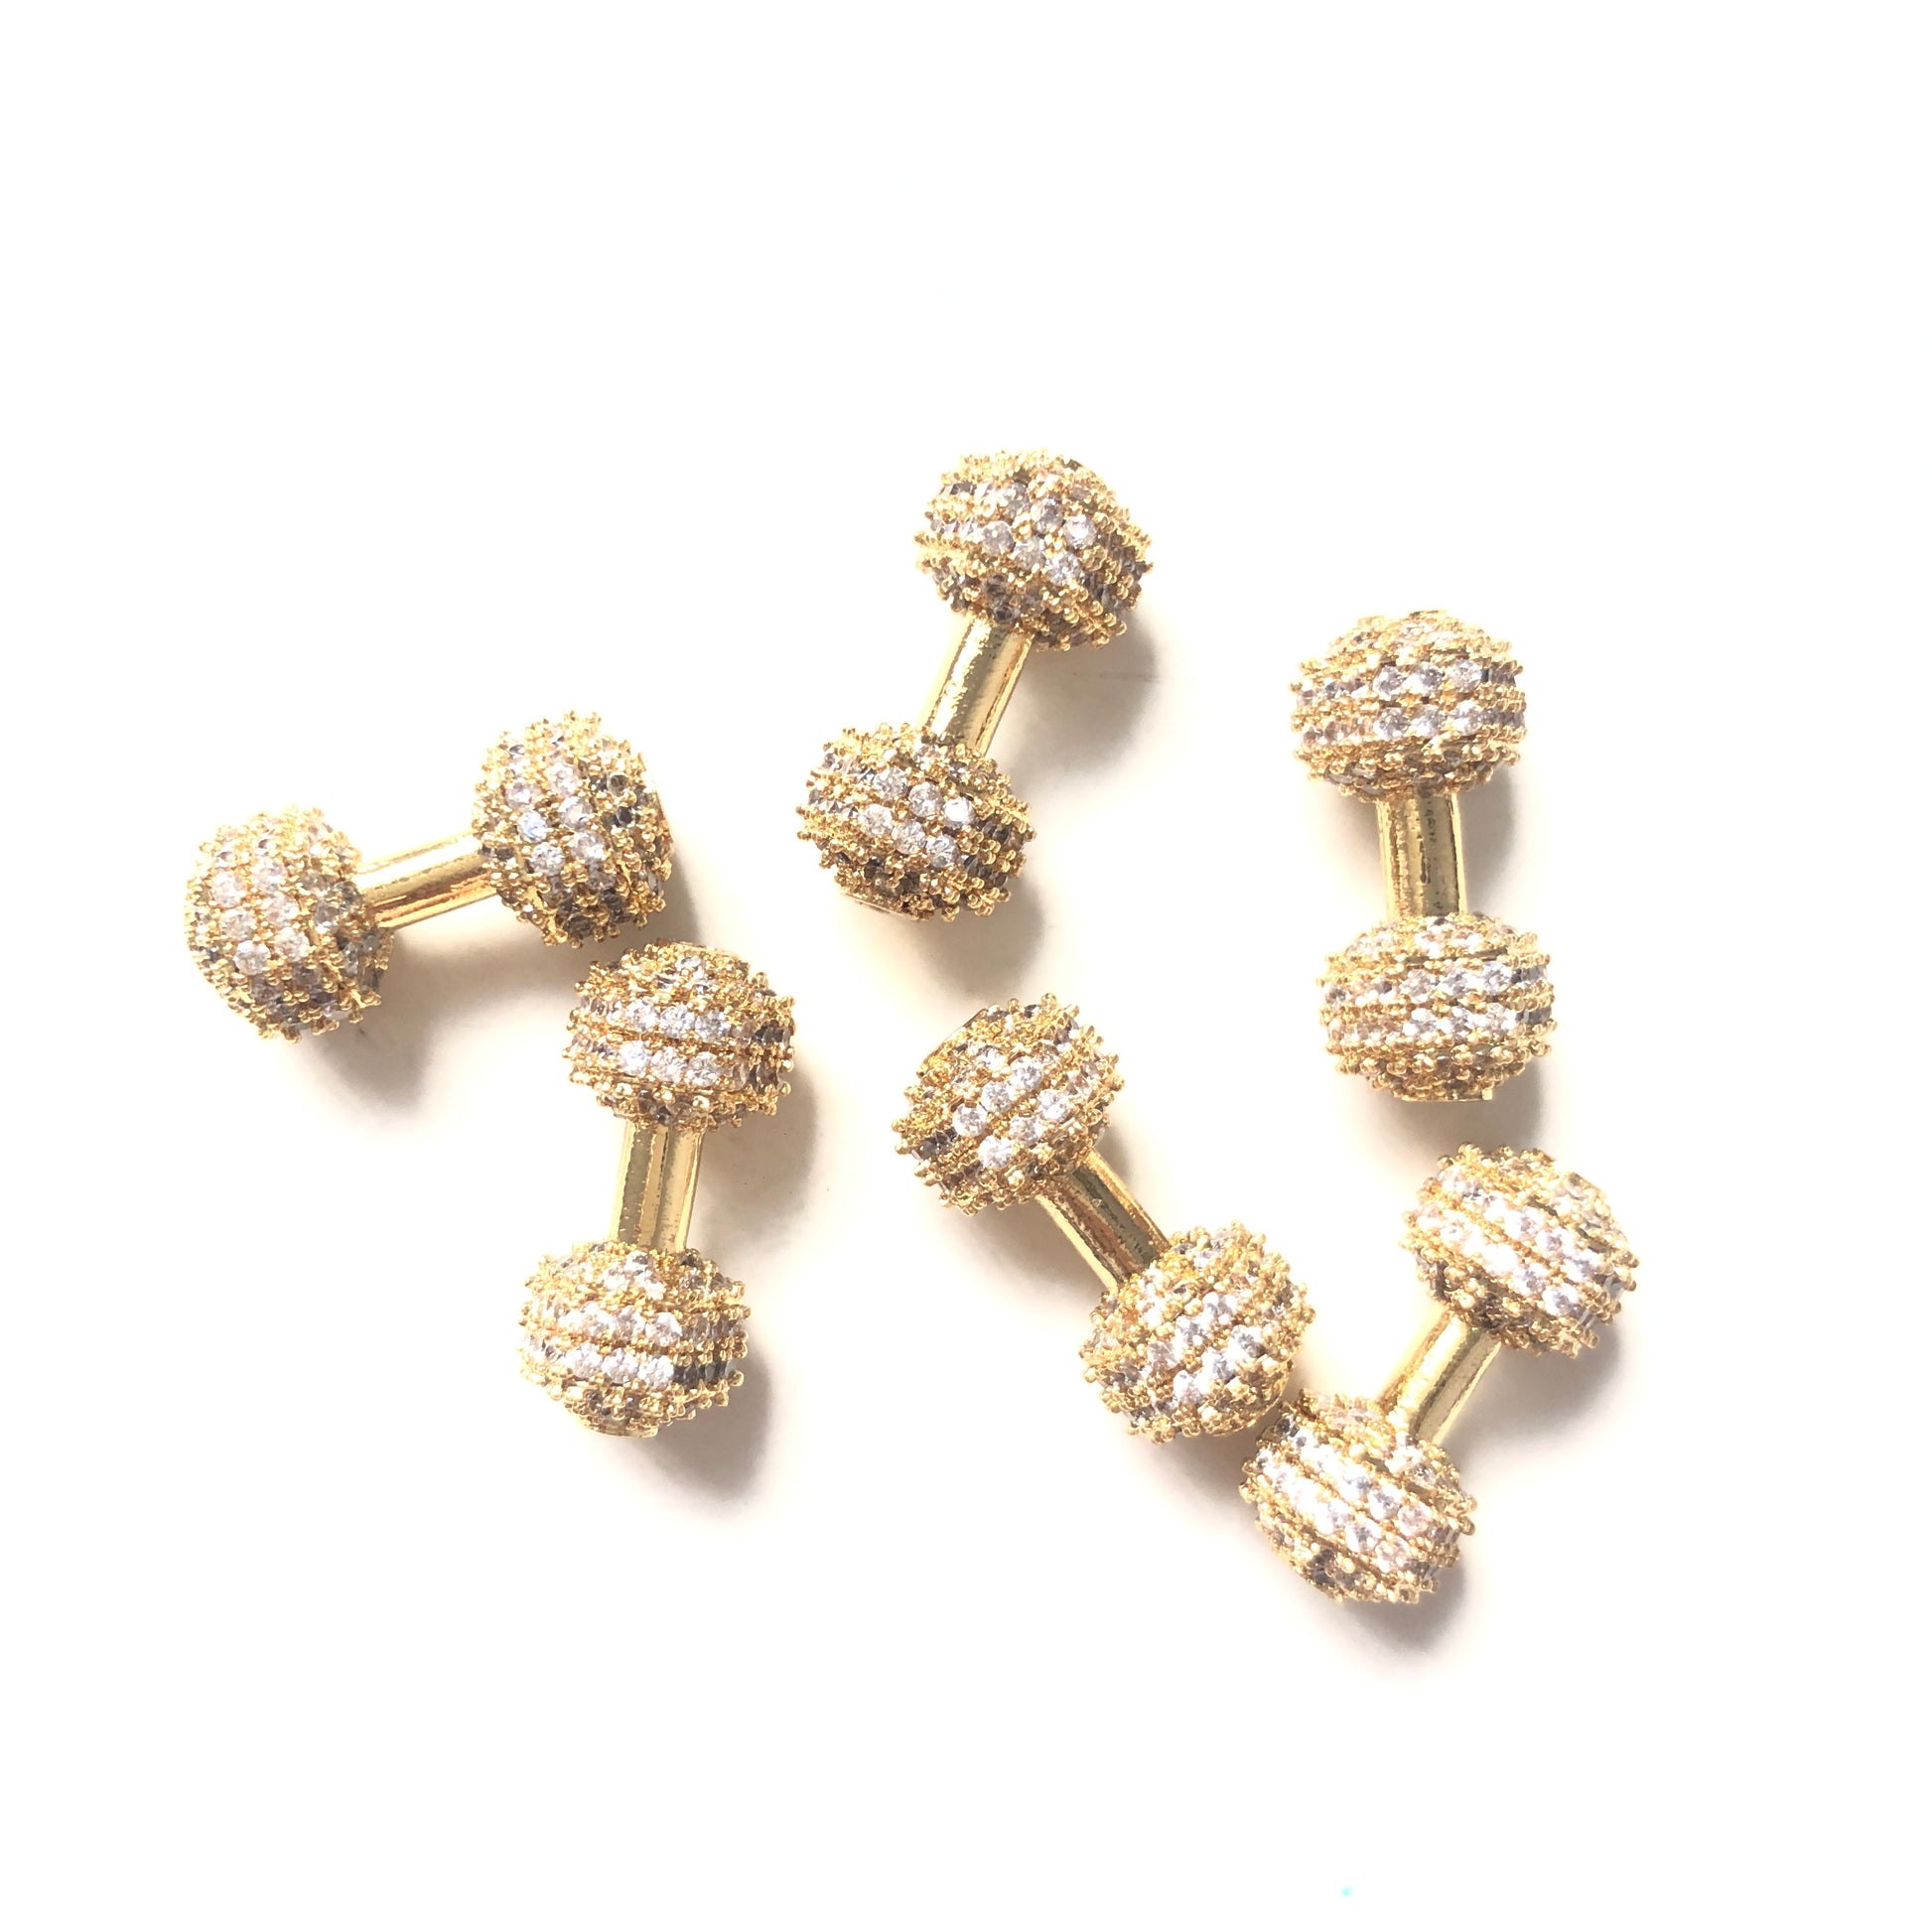 10pcs/lot 18*7.8mm CZ Paved Dumbbell Spacers Gold CZ Paved Spacers Charms Beads Beyond